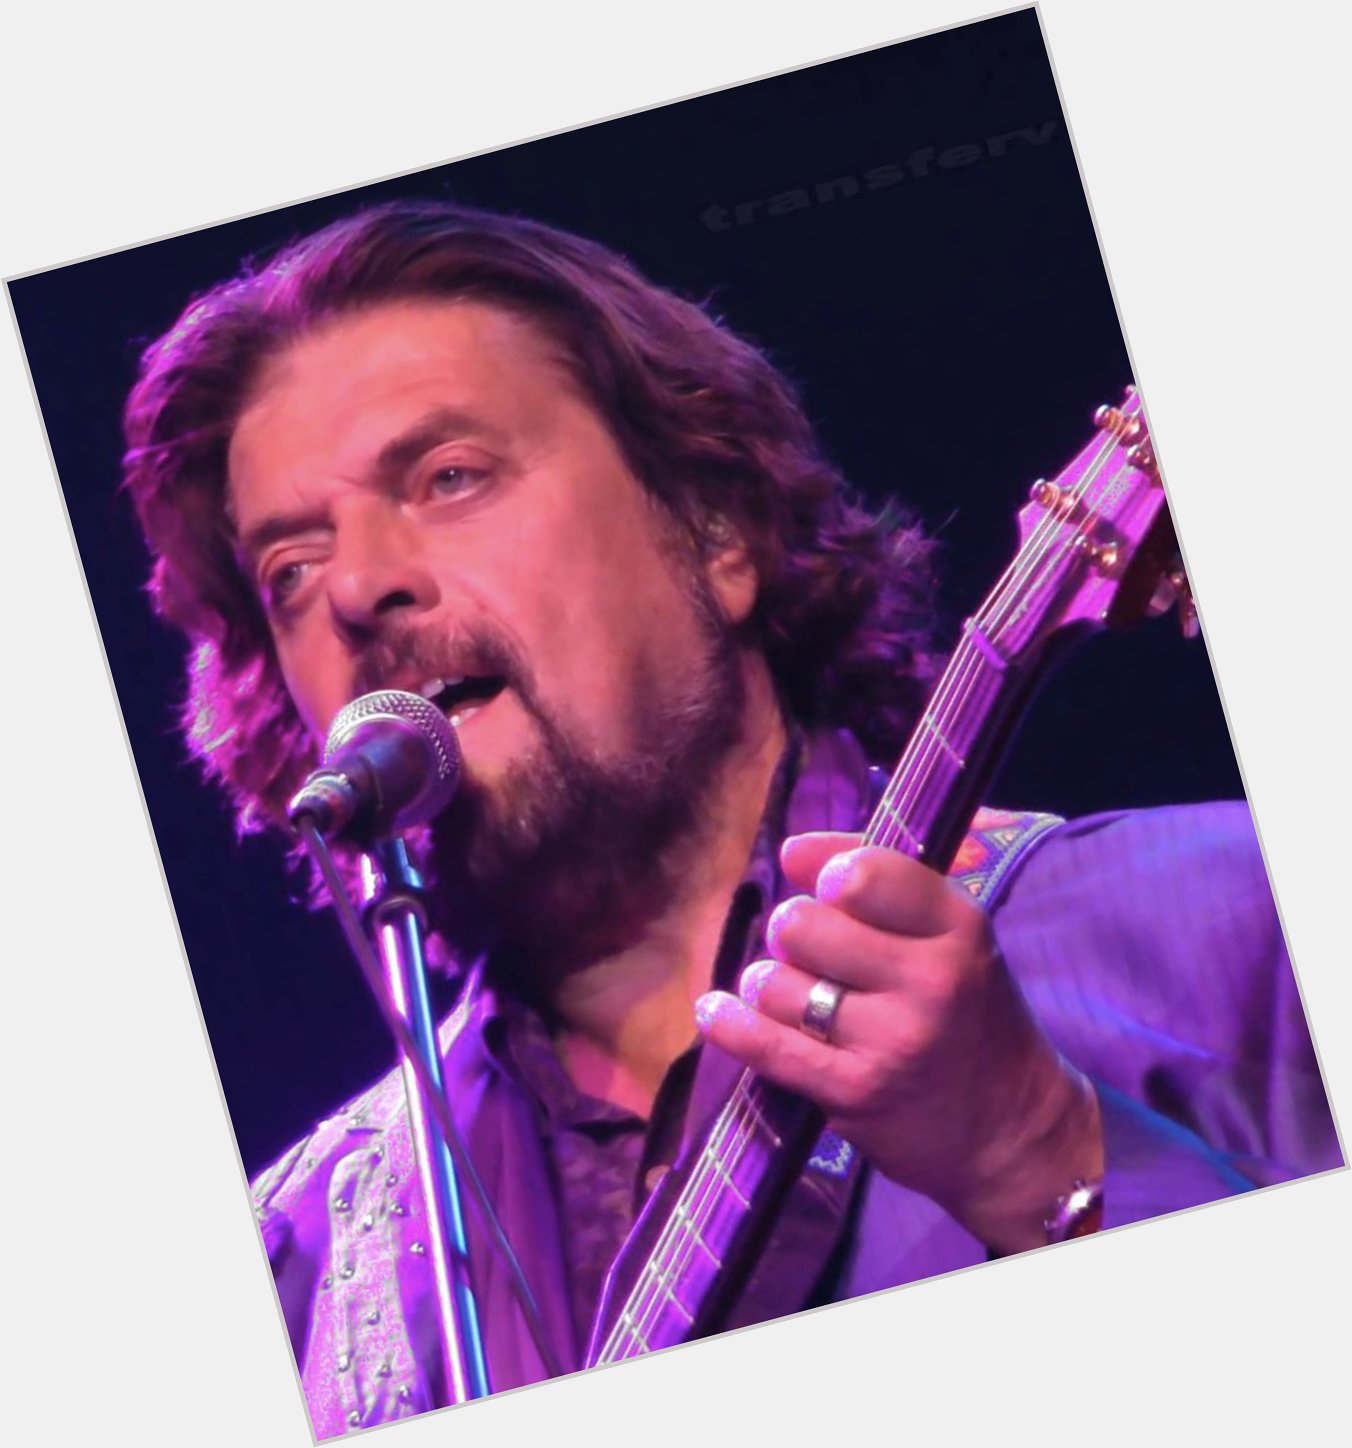 Happy birthday to Alan Parsons.
engineered Dark Side of the Moon at age 24. 